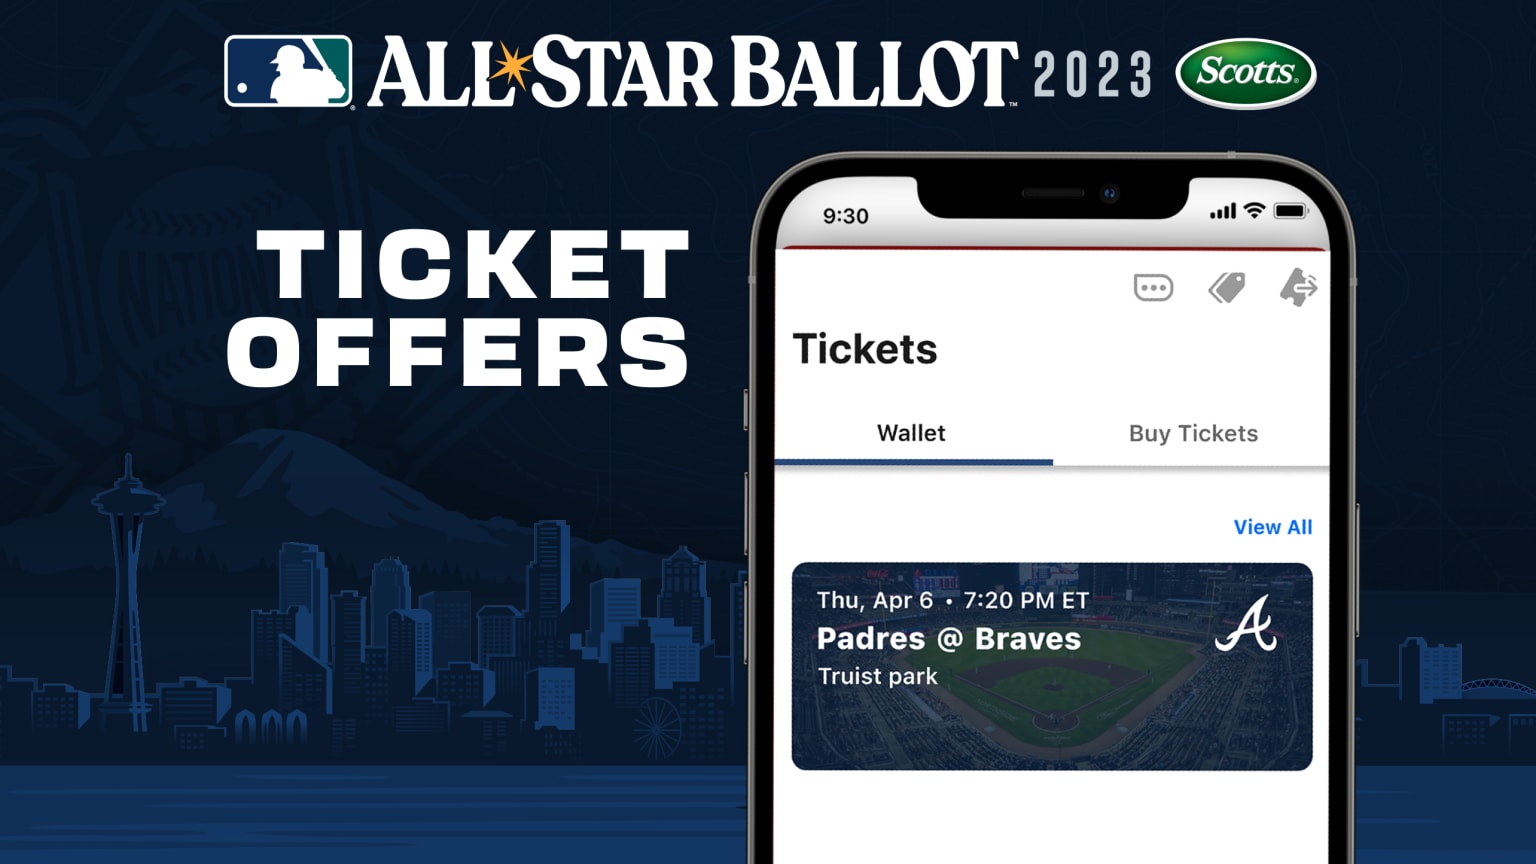 How the Braves are faring in All-Star voting